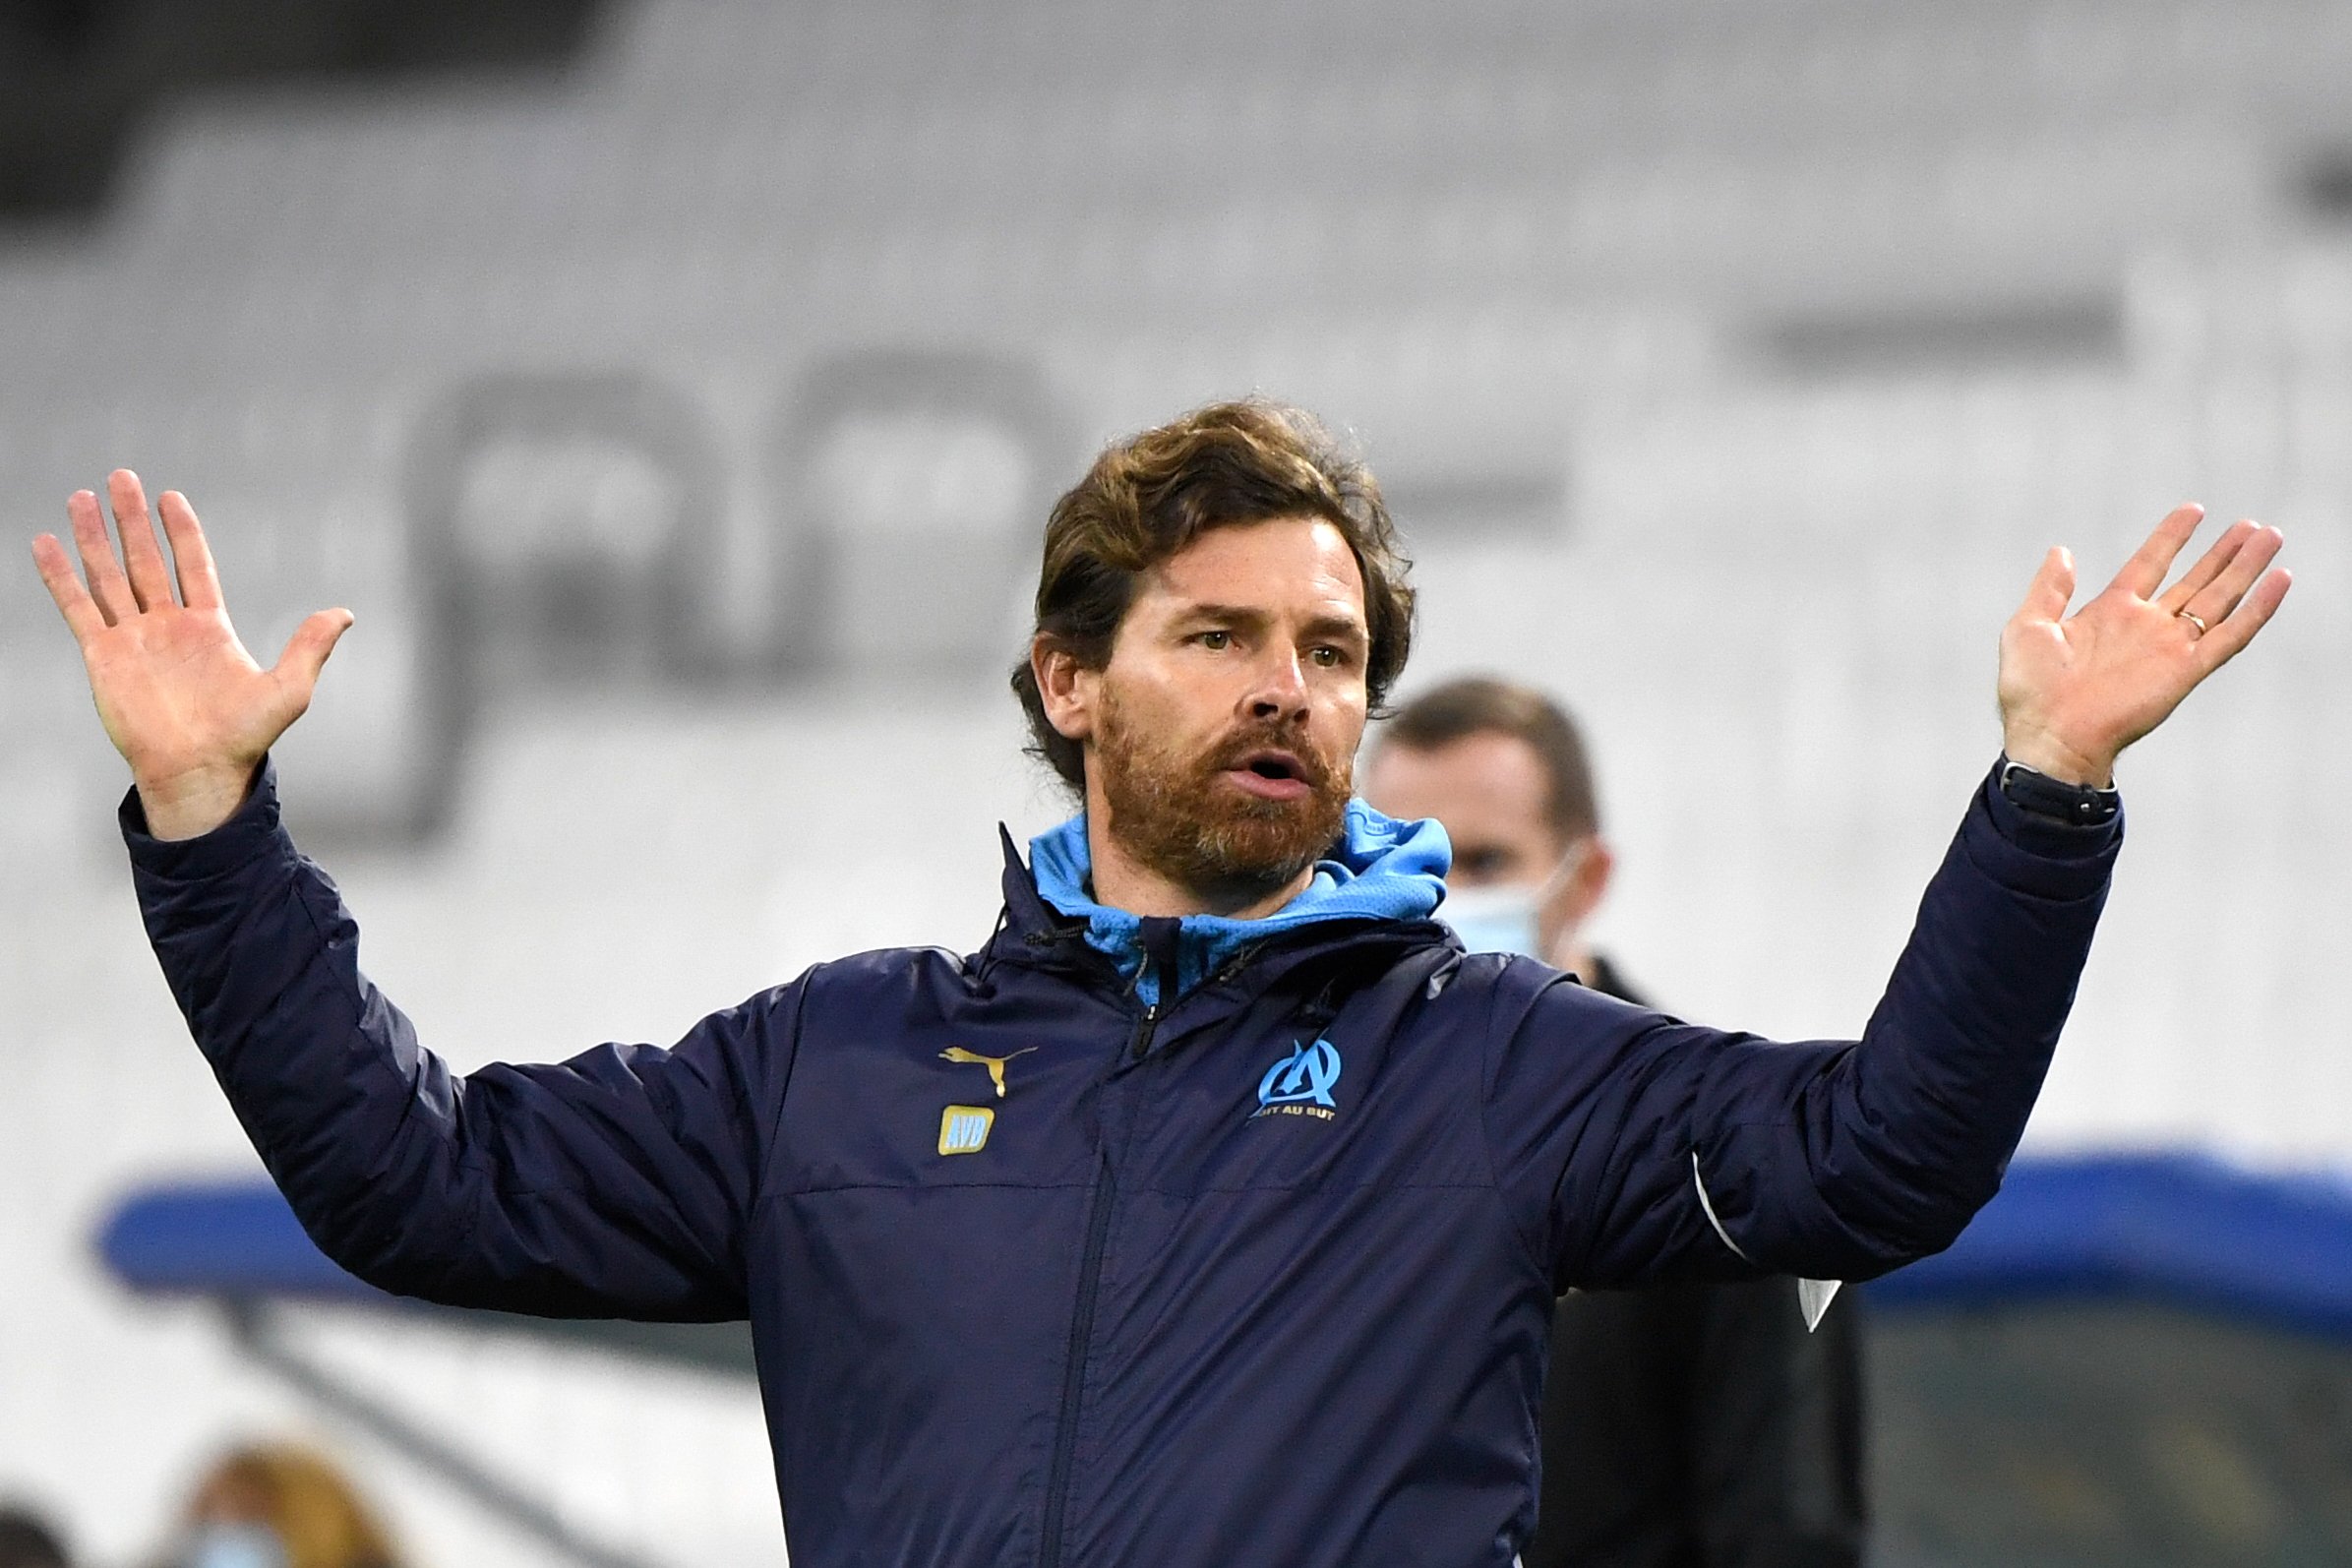 Villas-Boas to Celtic chat is bookie nonsense; club should steer clear